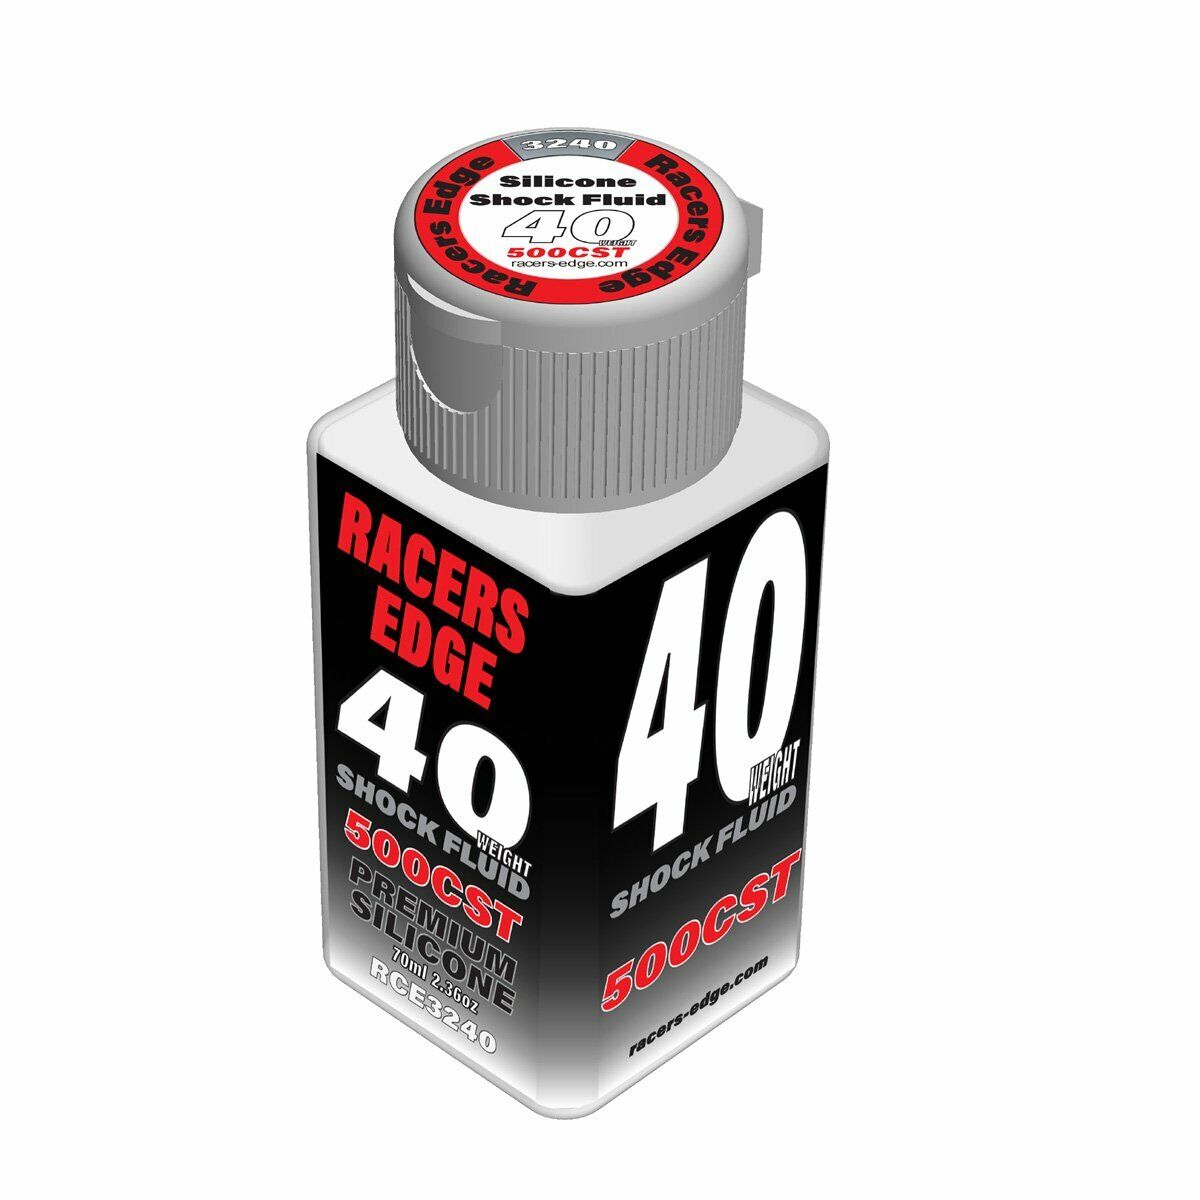 New Racers Edge 40 Weight 500cst 70ml Pure Silicone Shock Oil Free Us Ship